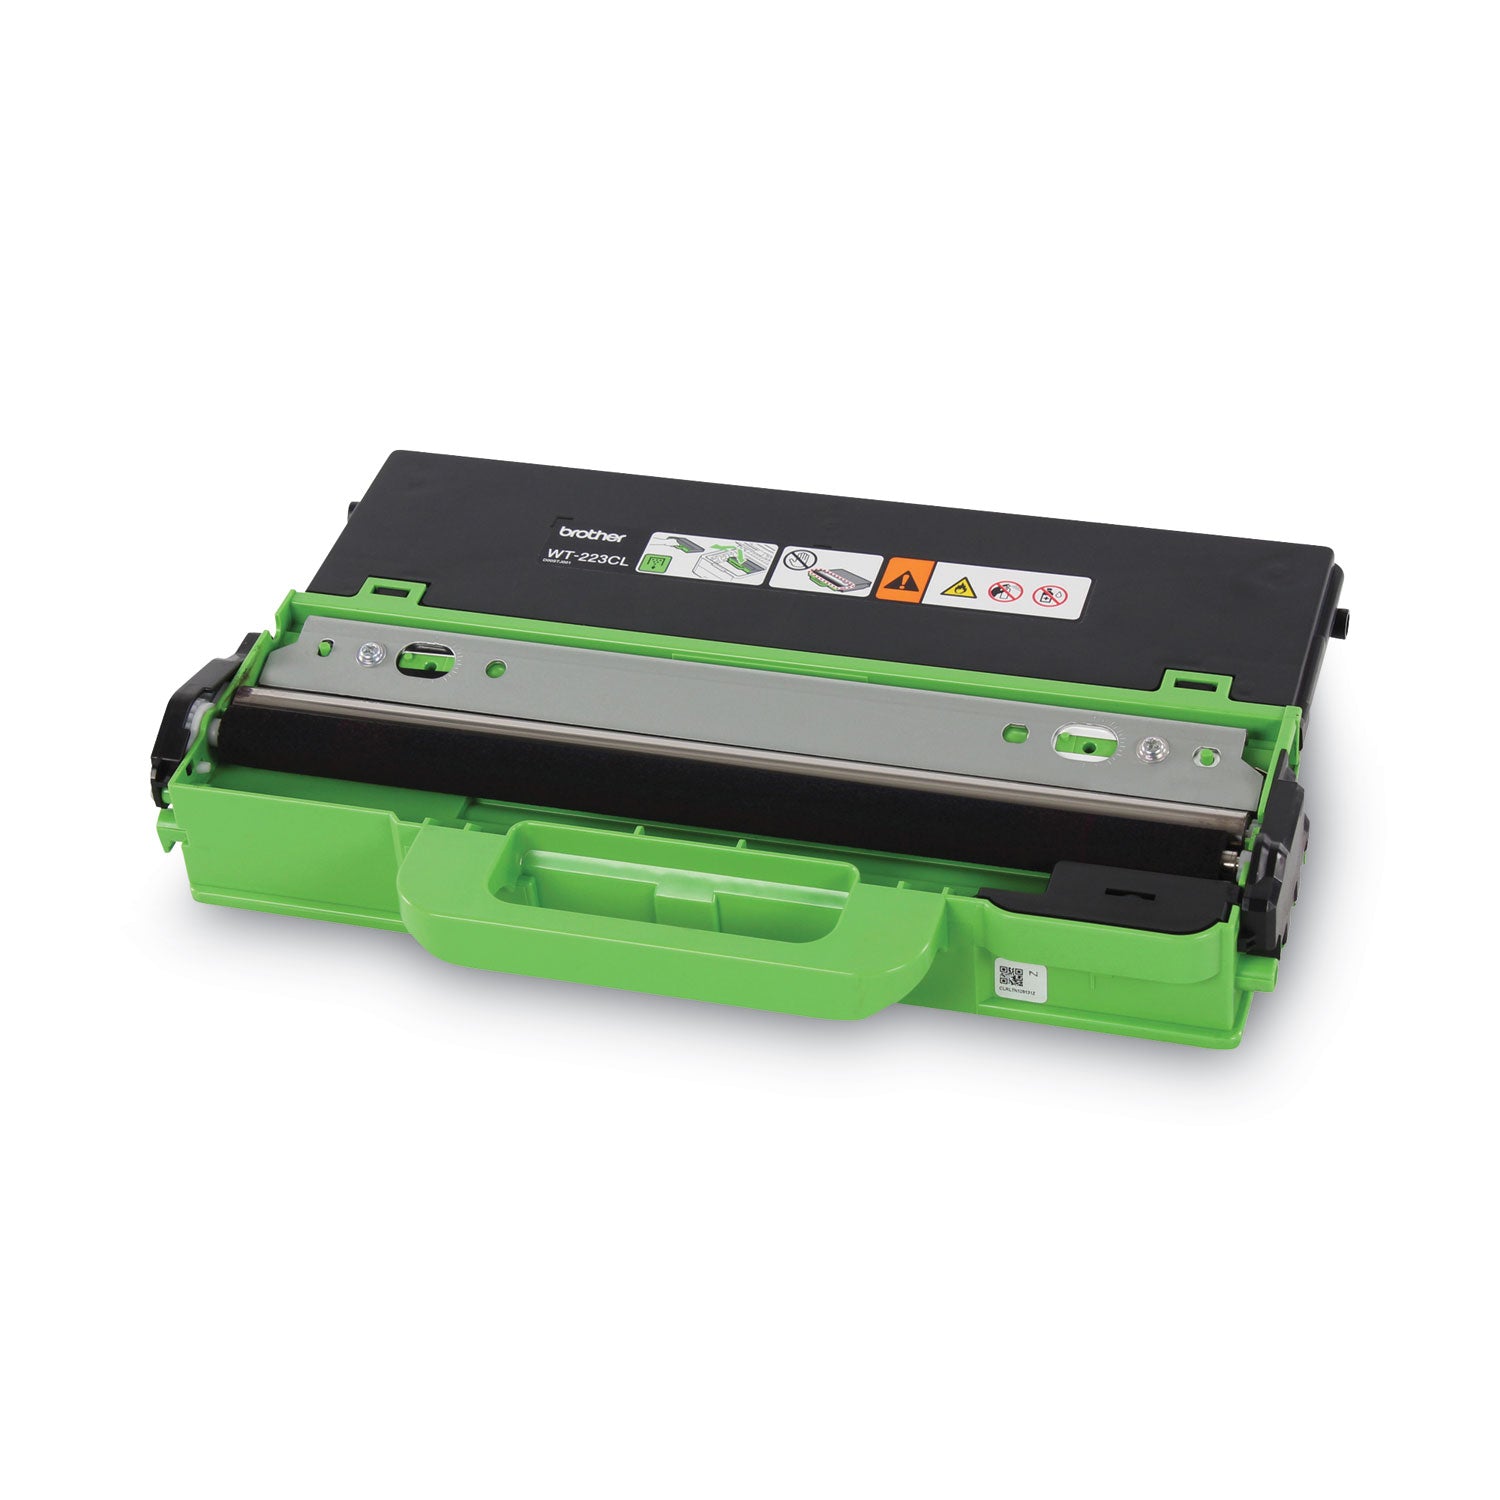 wt223cl-waste-toner-box-50000-page-yield_brtwt223cl - 4